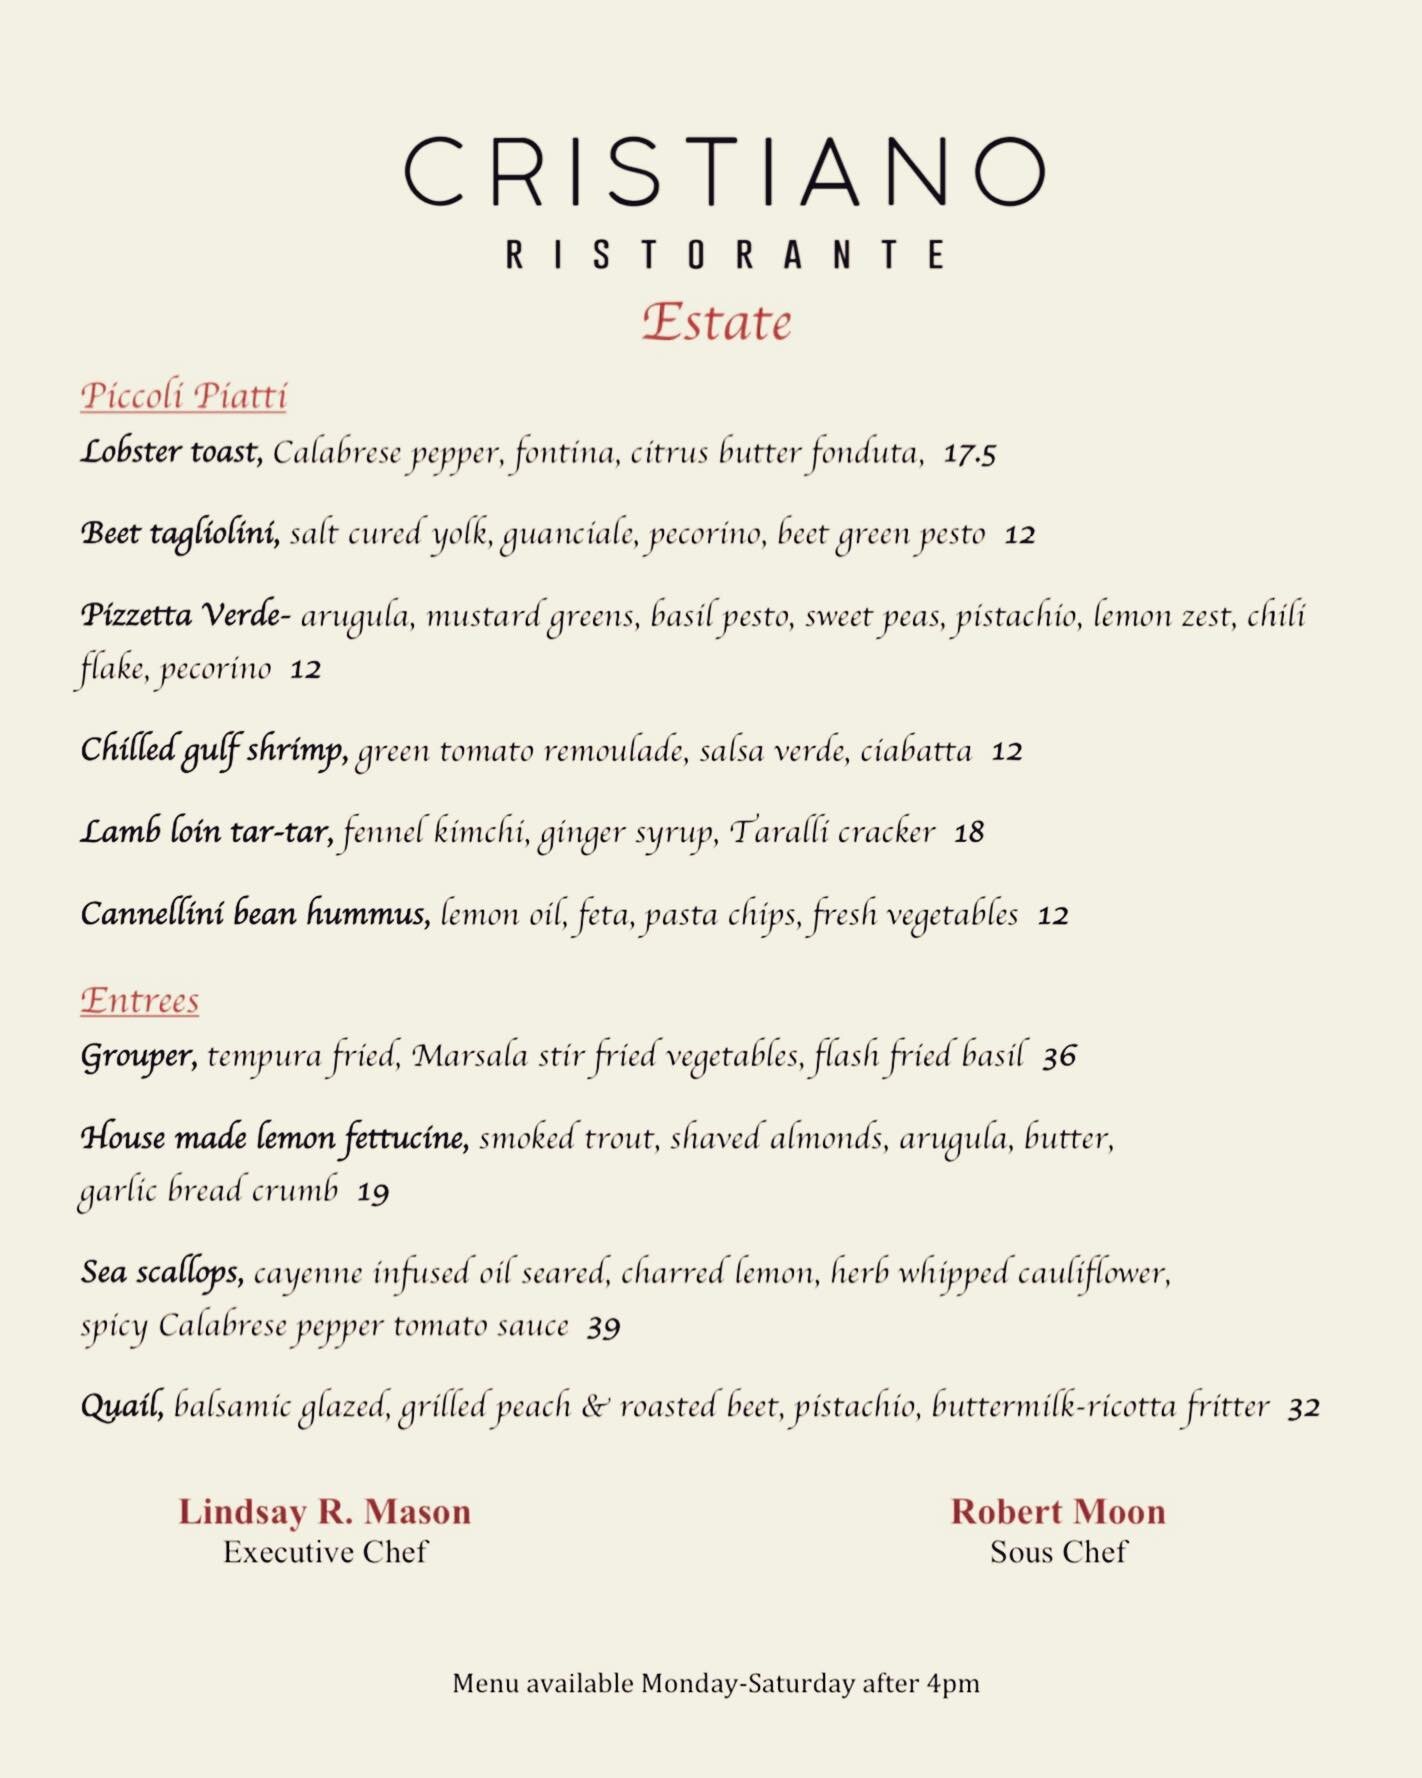 Our summer seasonal menu starts tonight! Come try some of these exciting new dishes!